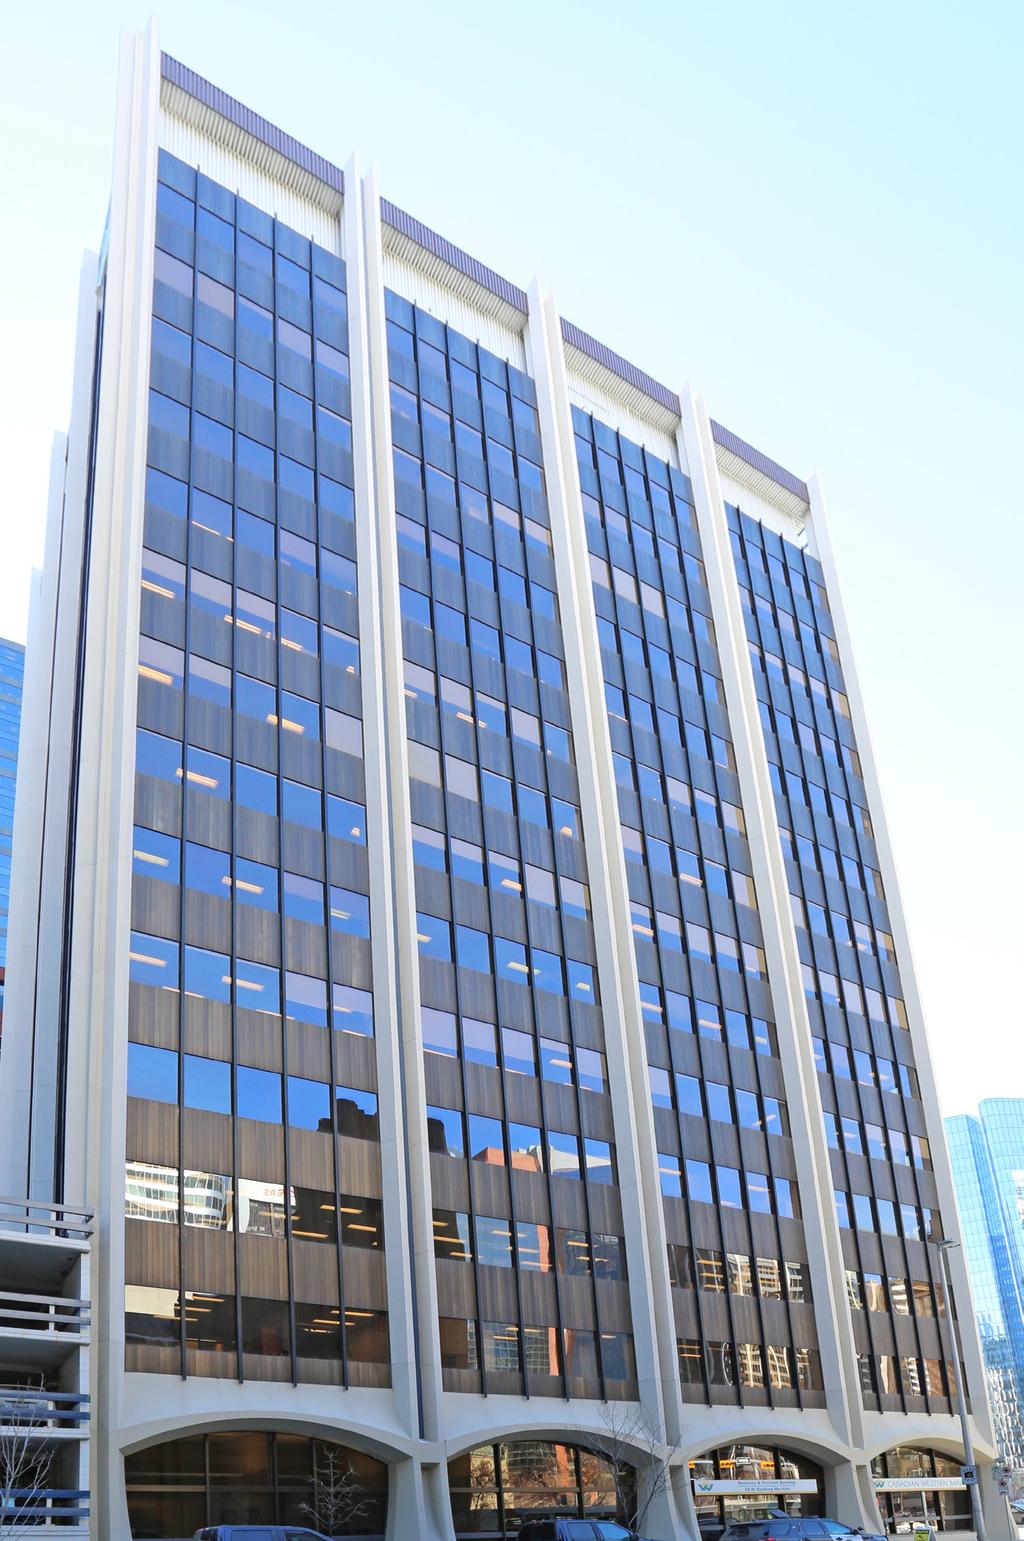 1969 Number of Floors: 15 Typical Floor Size: 9,980 sf Sublease Details Suite: Suite 700 9,150 sf Term: May 30, 2025 Sublandlord: Dominion Diamond Corporation Asking Rate: Market Op. Costs: $20.